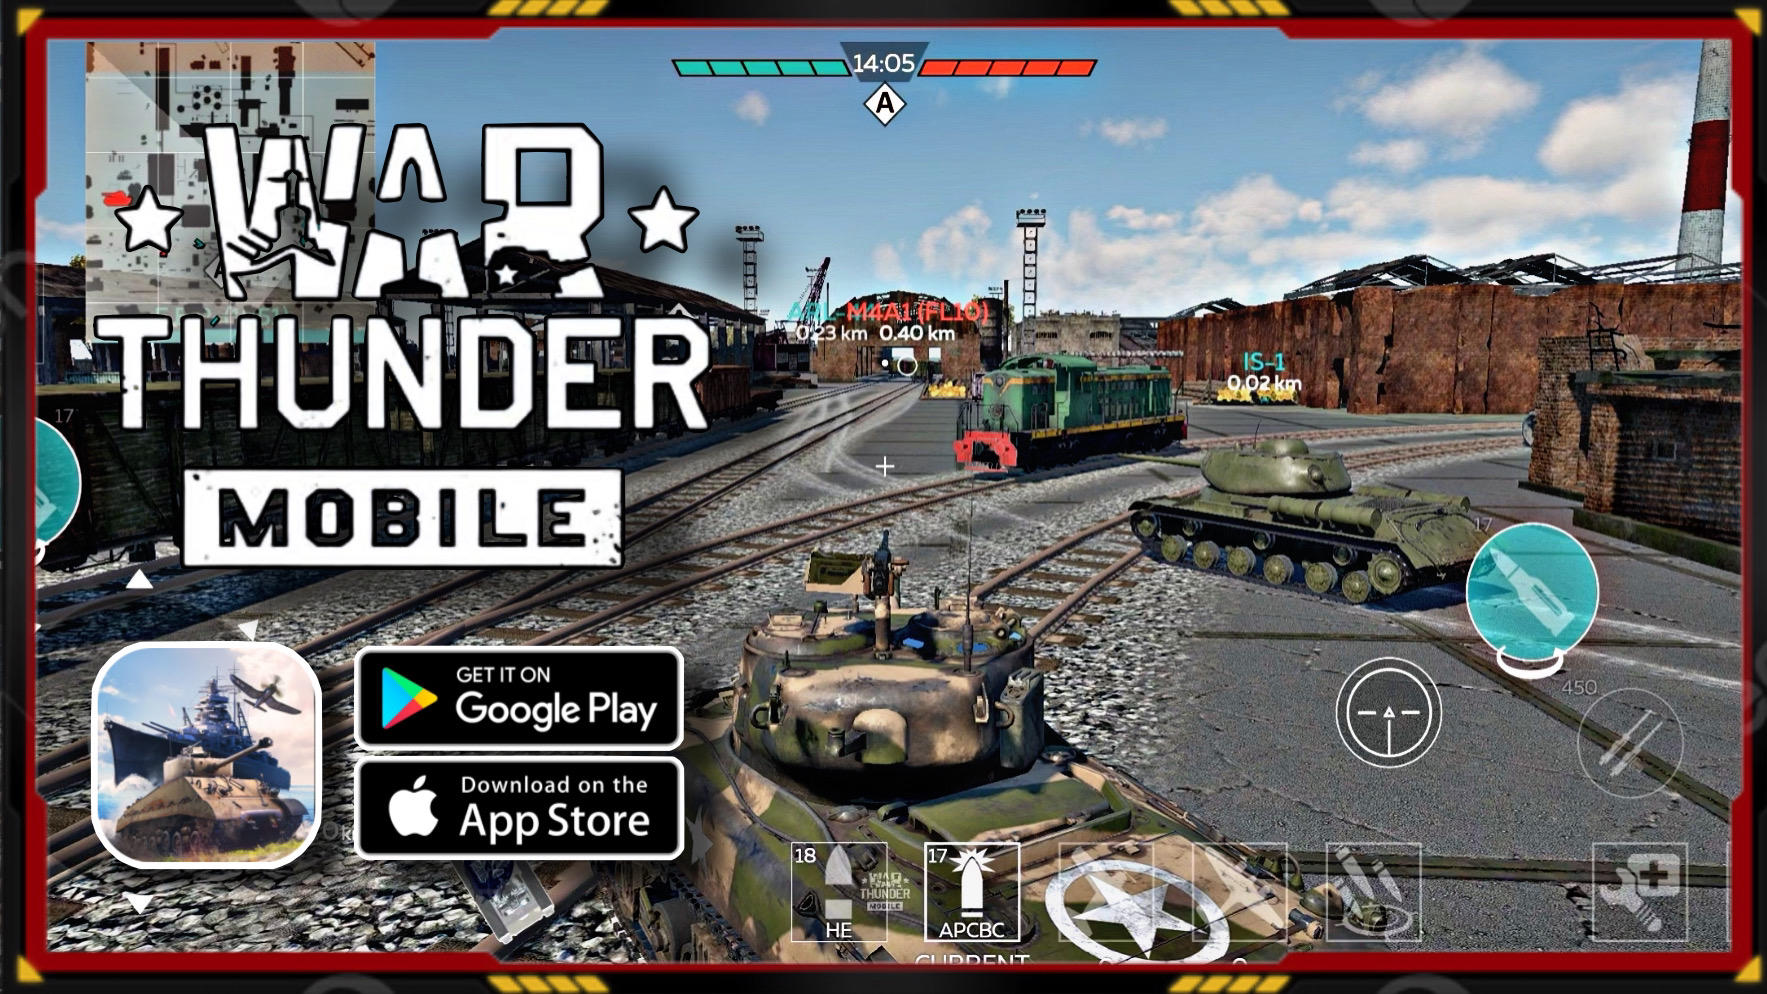 Standoff 2 android iOS apk download for free-TapTap